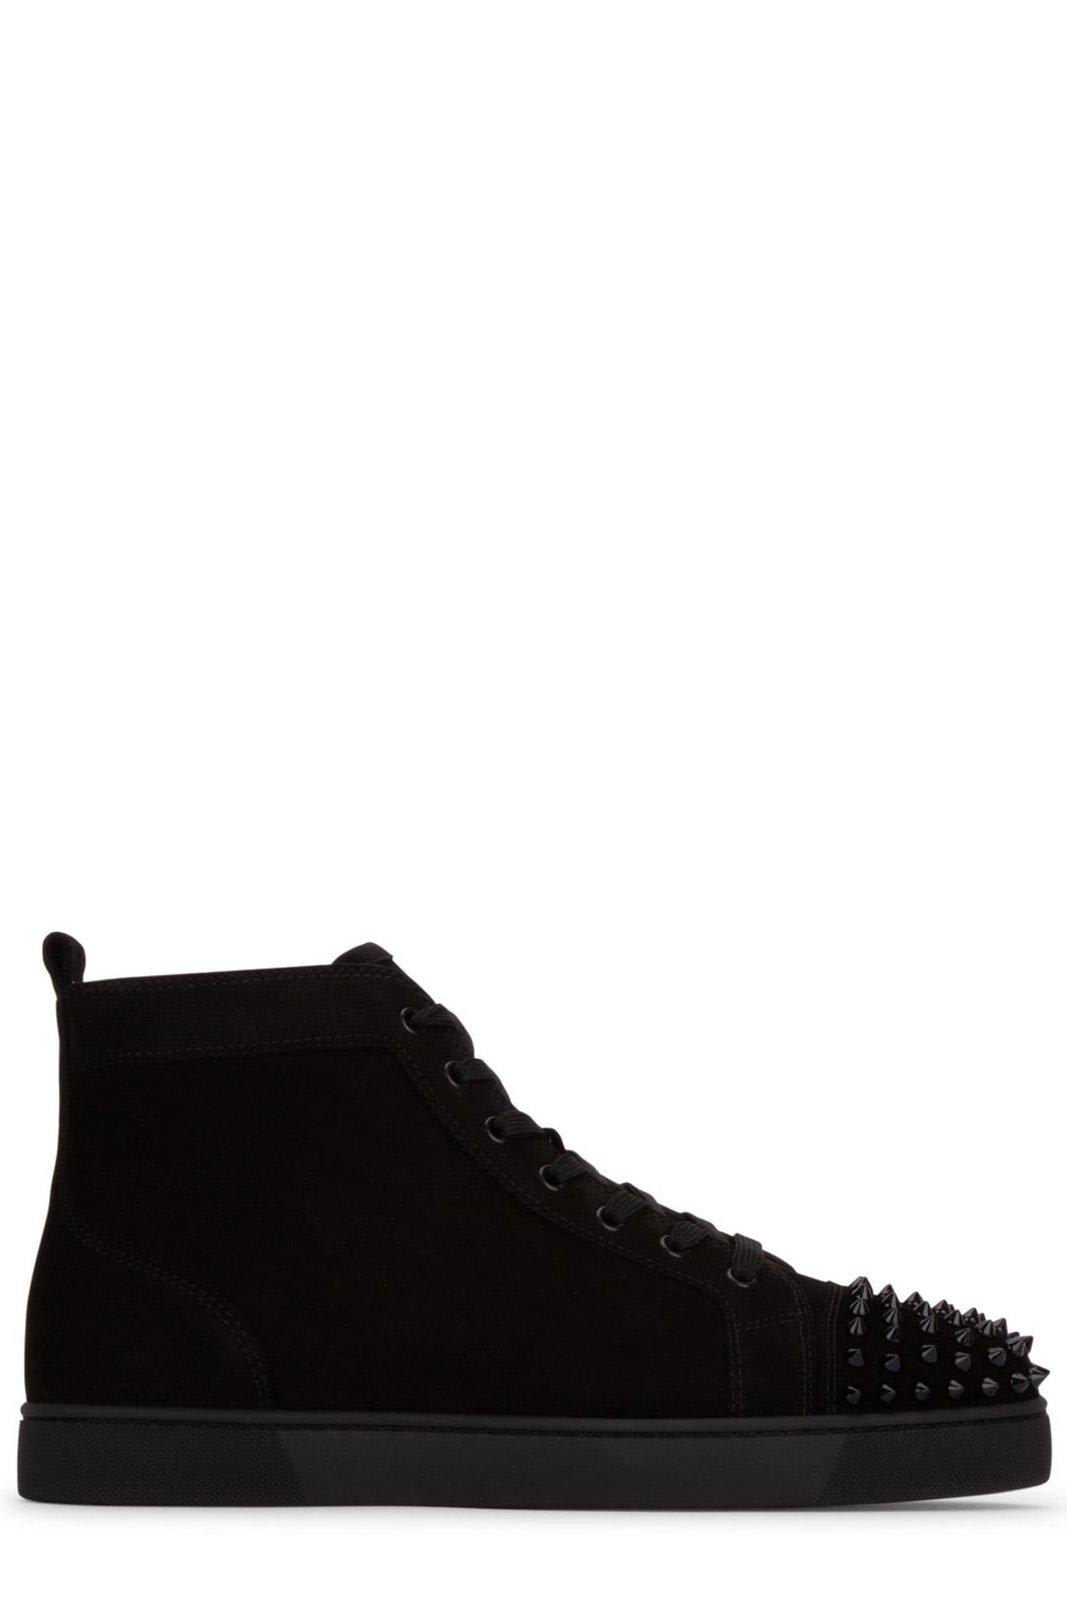 CHRISTIAN LOUBOUTIN LOU SPIKES EMBELLISHED HIGH-TOP SNEAKERS